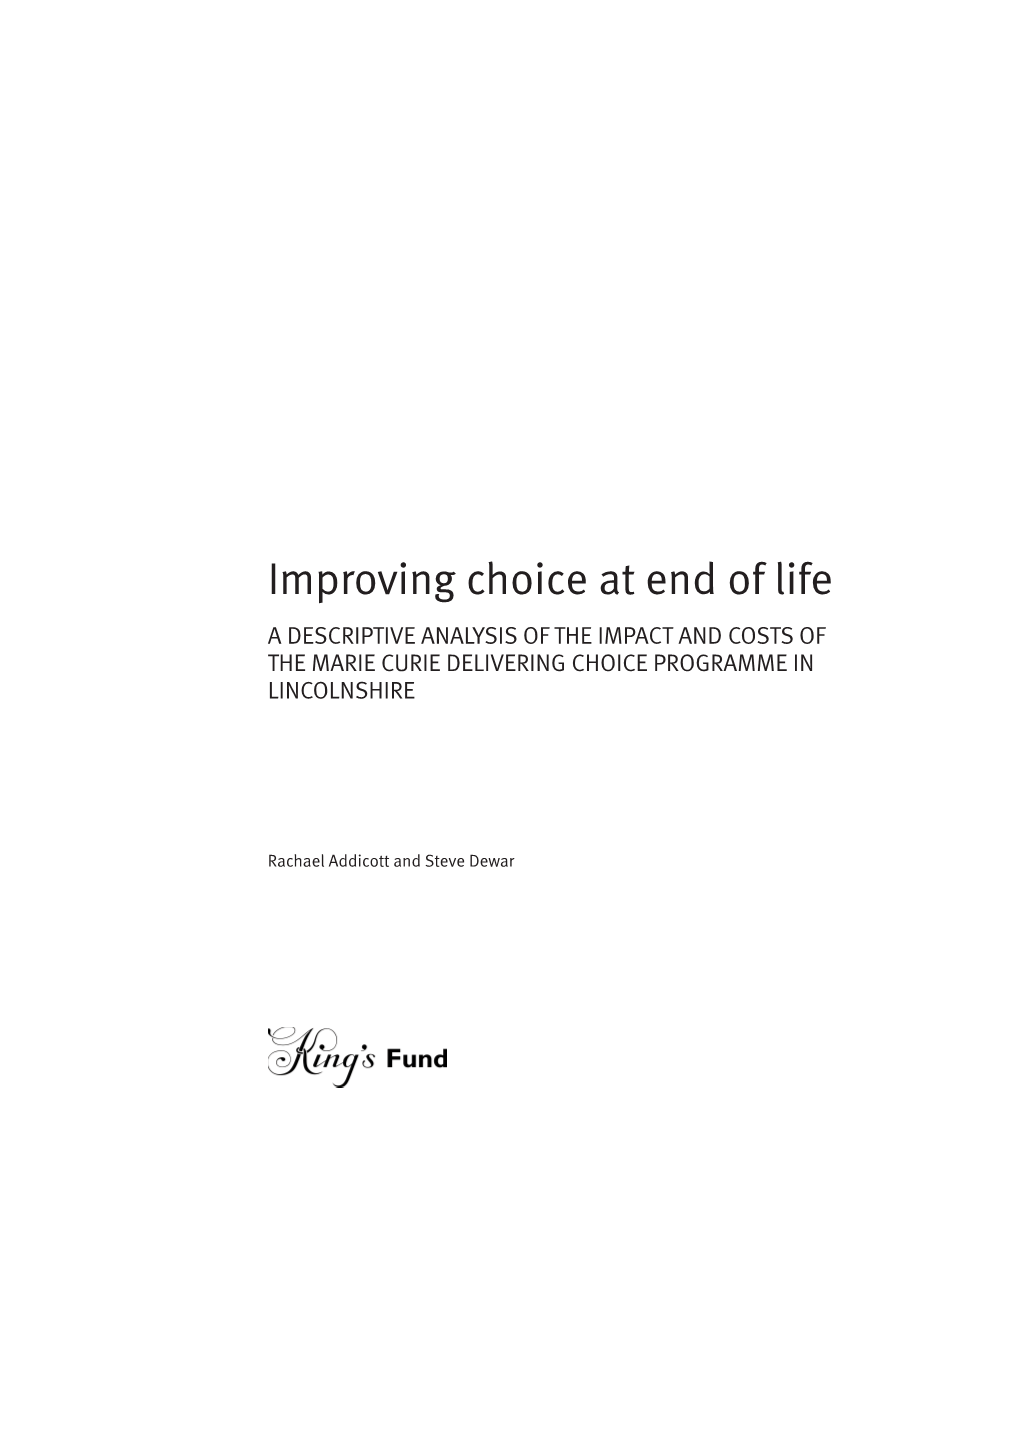 Improving Choice at End of Life a DESCRIPTIVE ANALYSIS of the IMPACT and COSTS of the MARIE CURIE DELIVERING CHOICE PROGRAMME in LINCOLNSHIRE